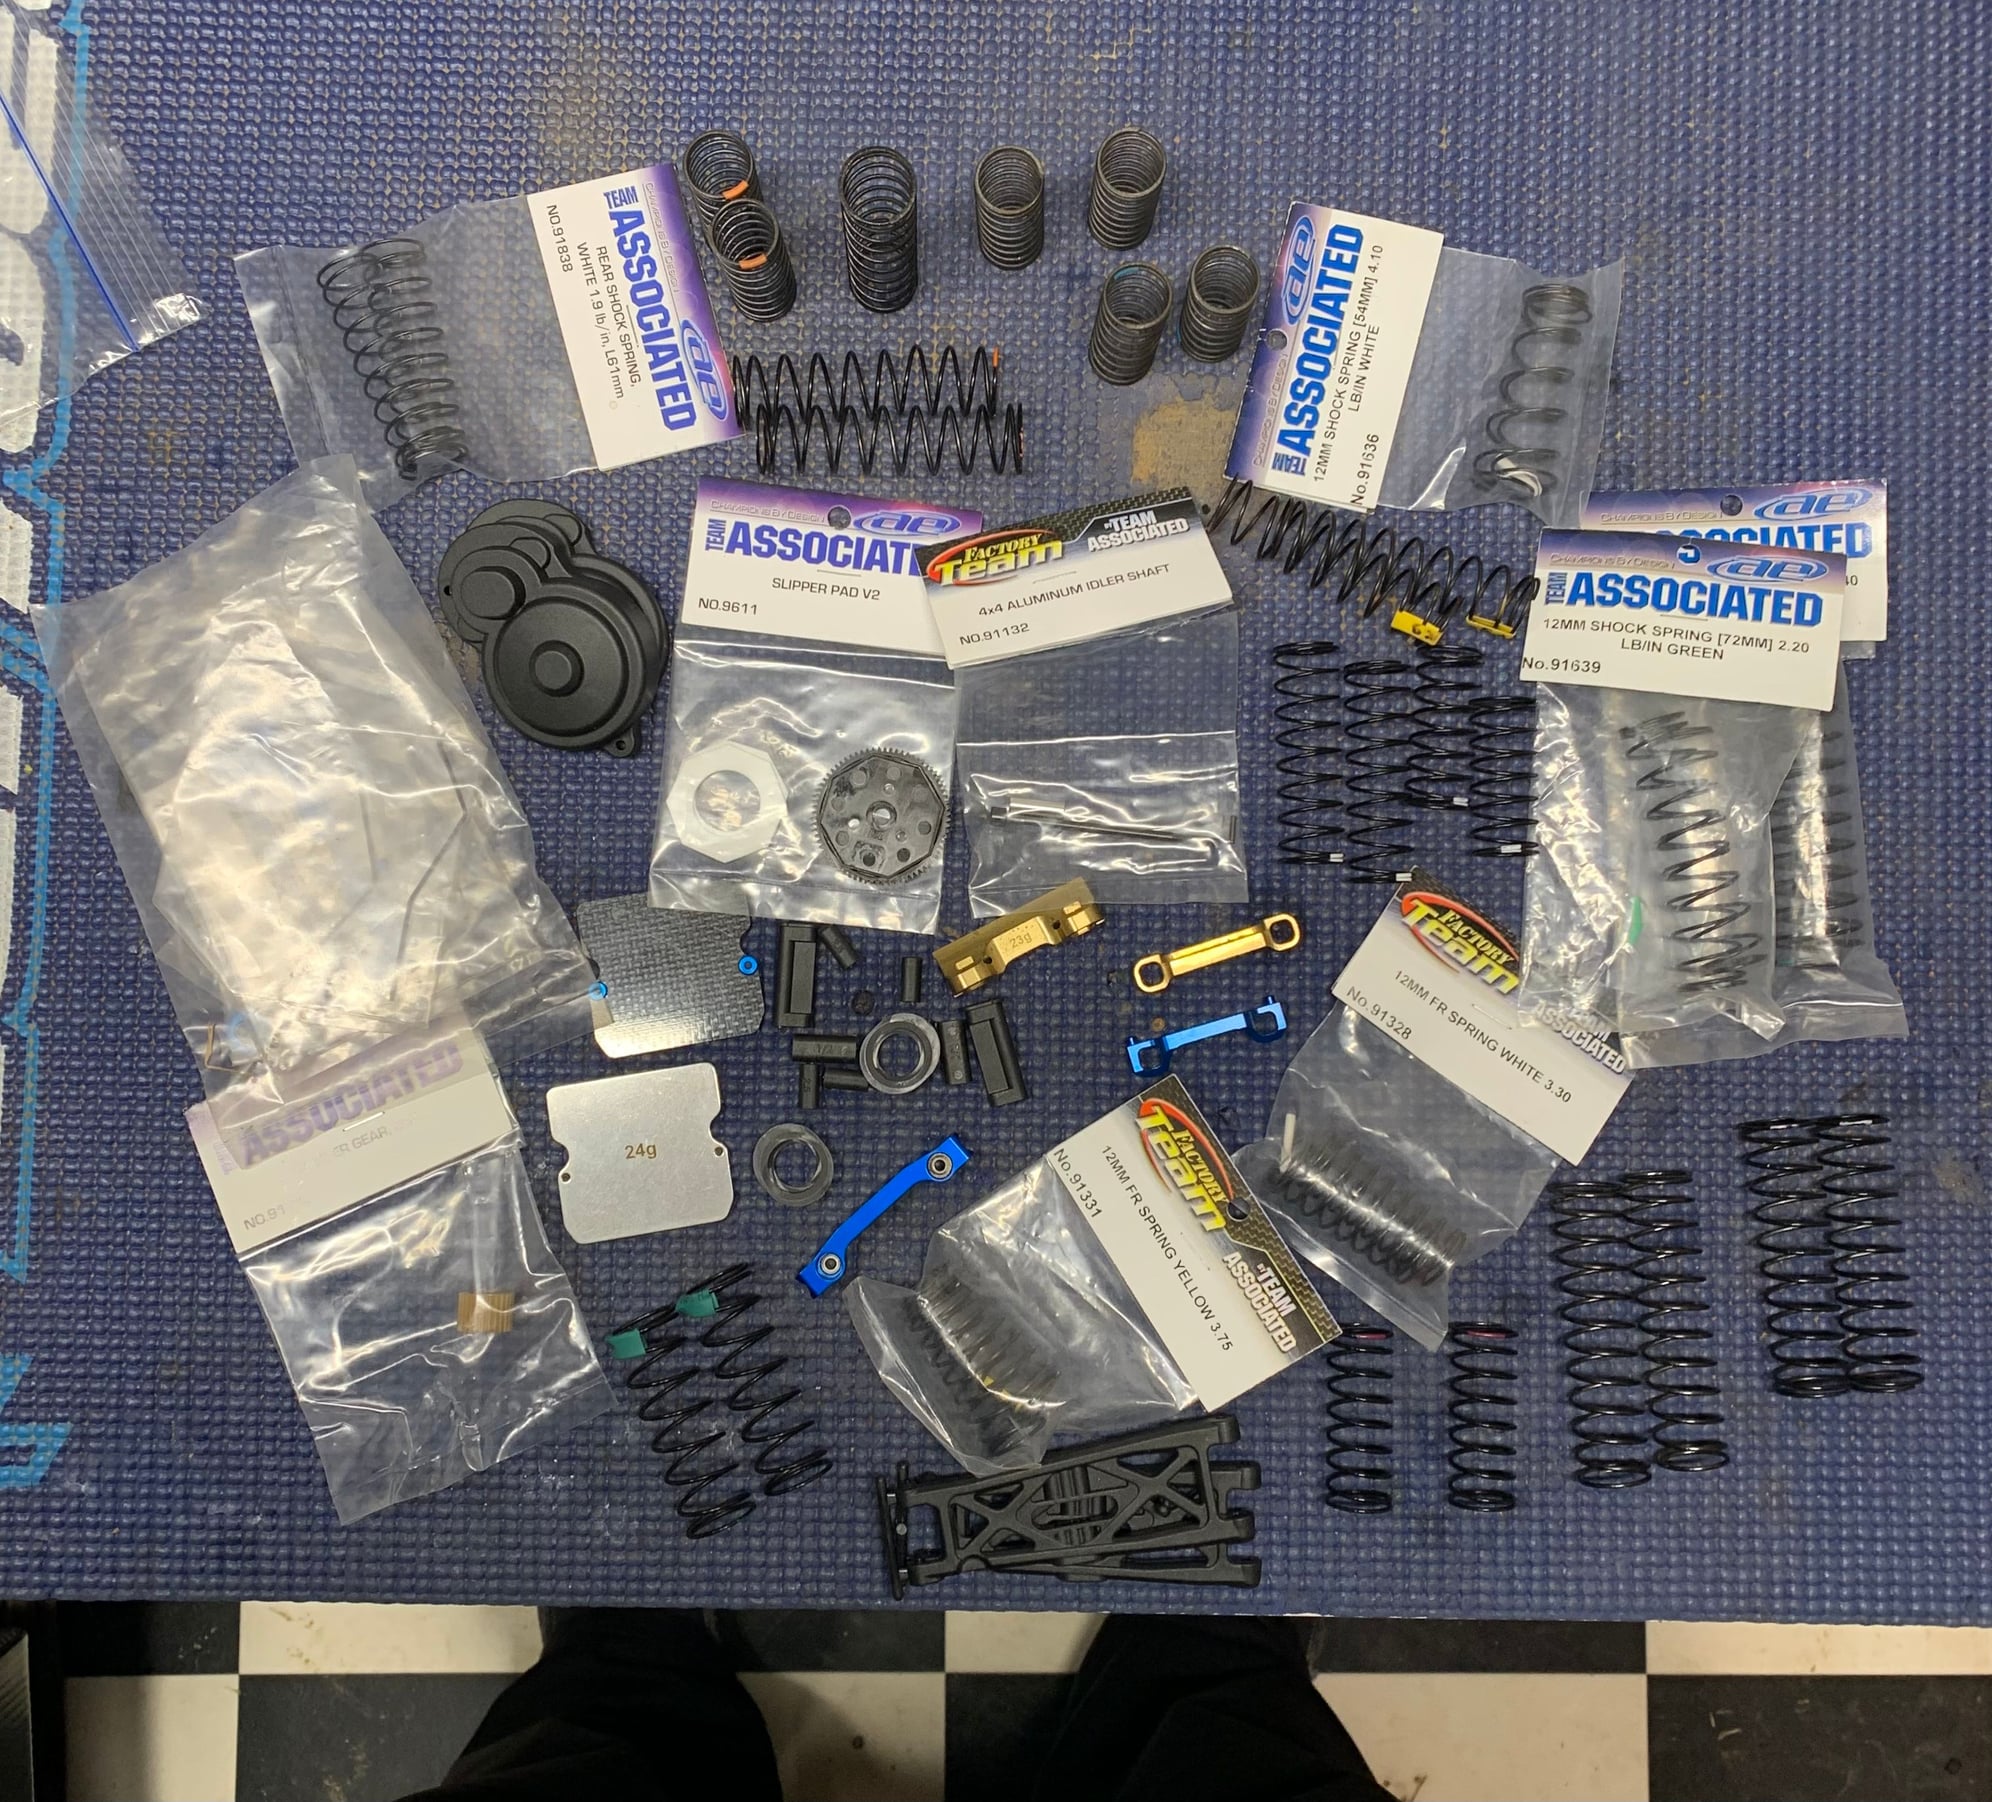 B6.1 - T6.1 - Sc6.1 brass parts / springs and more - R/C Tech Forums